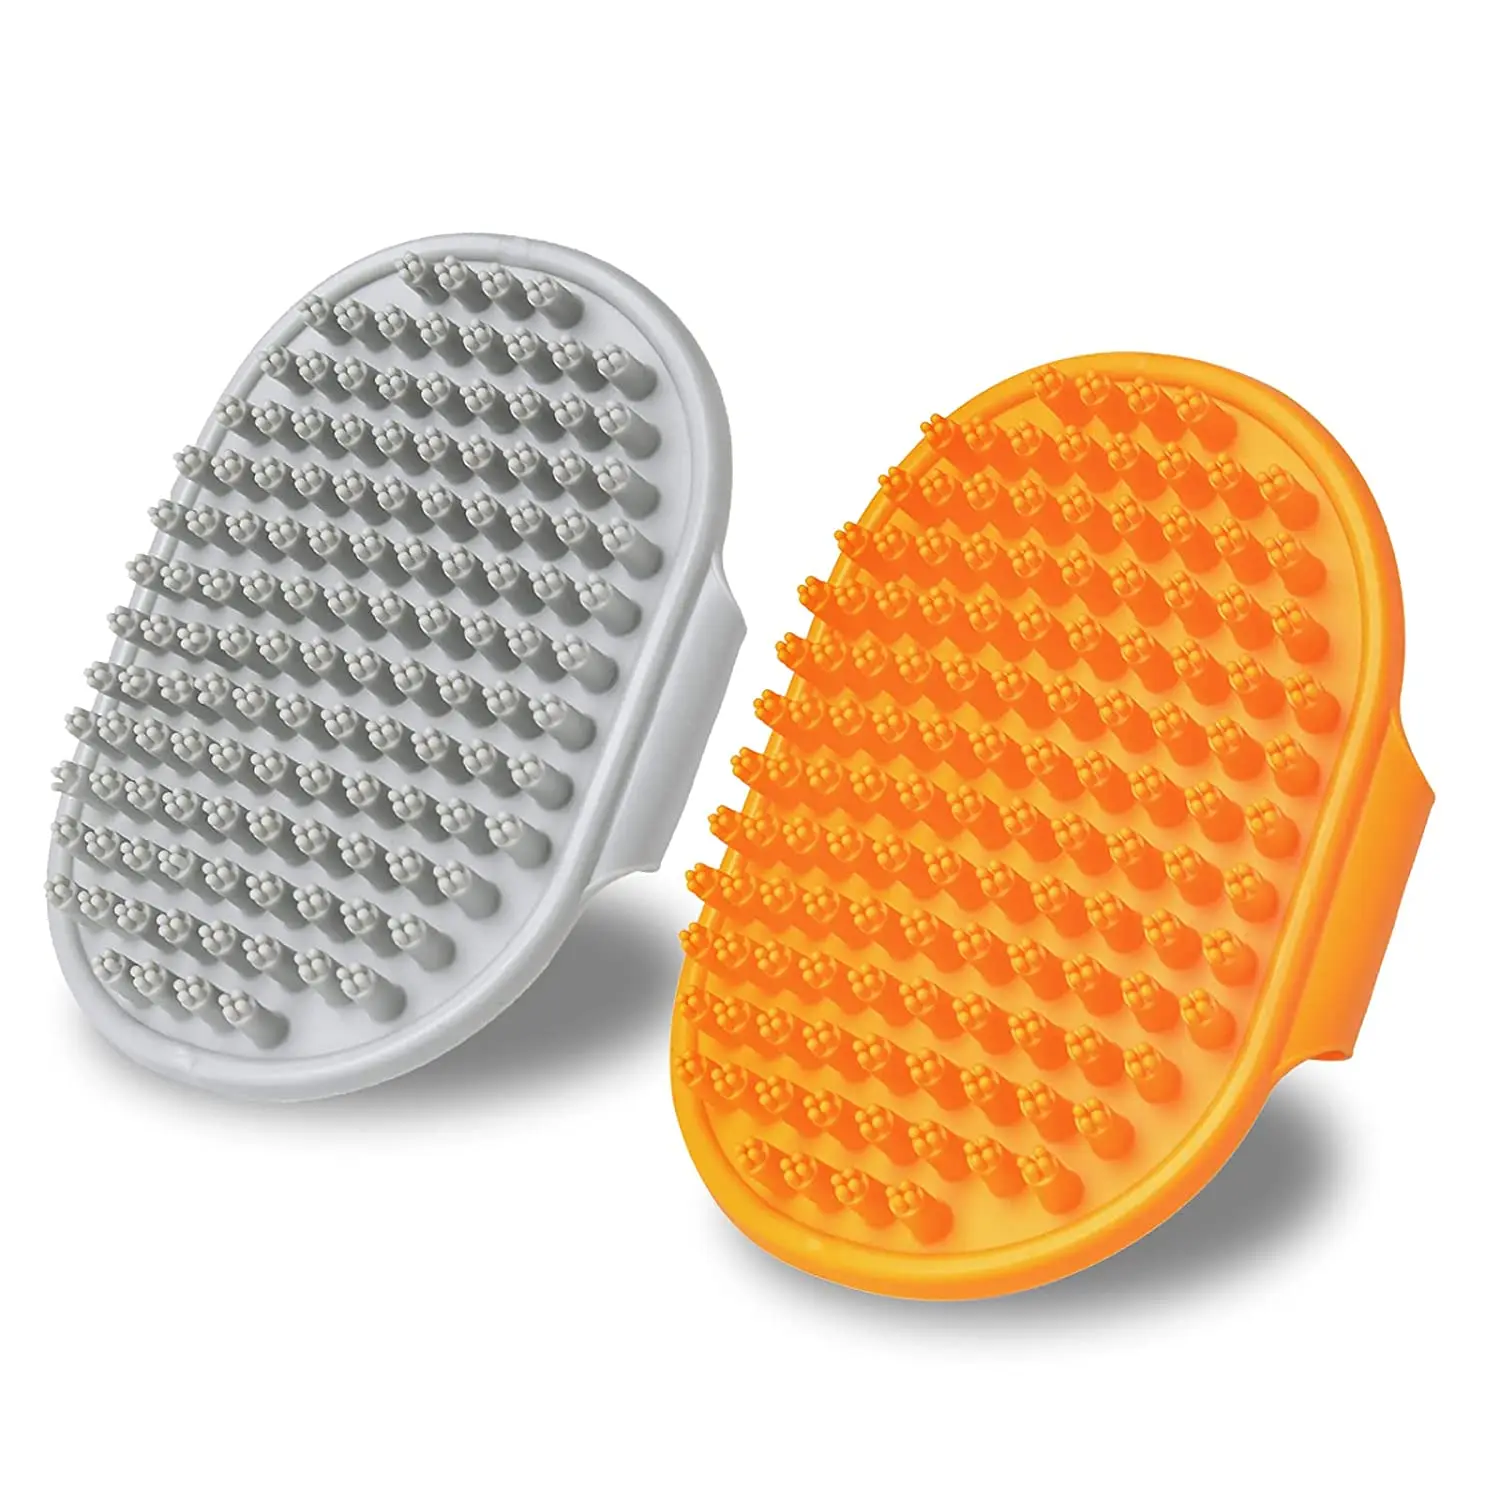 2 Pcs Dog Brush for Shedding Short Haired Dogs, Dog Grooming Shedding Bath Brush Soothing Massage  Comb for Dogs & Cats